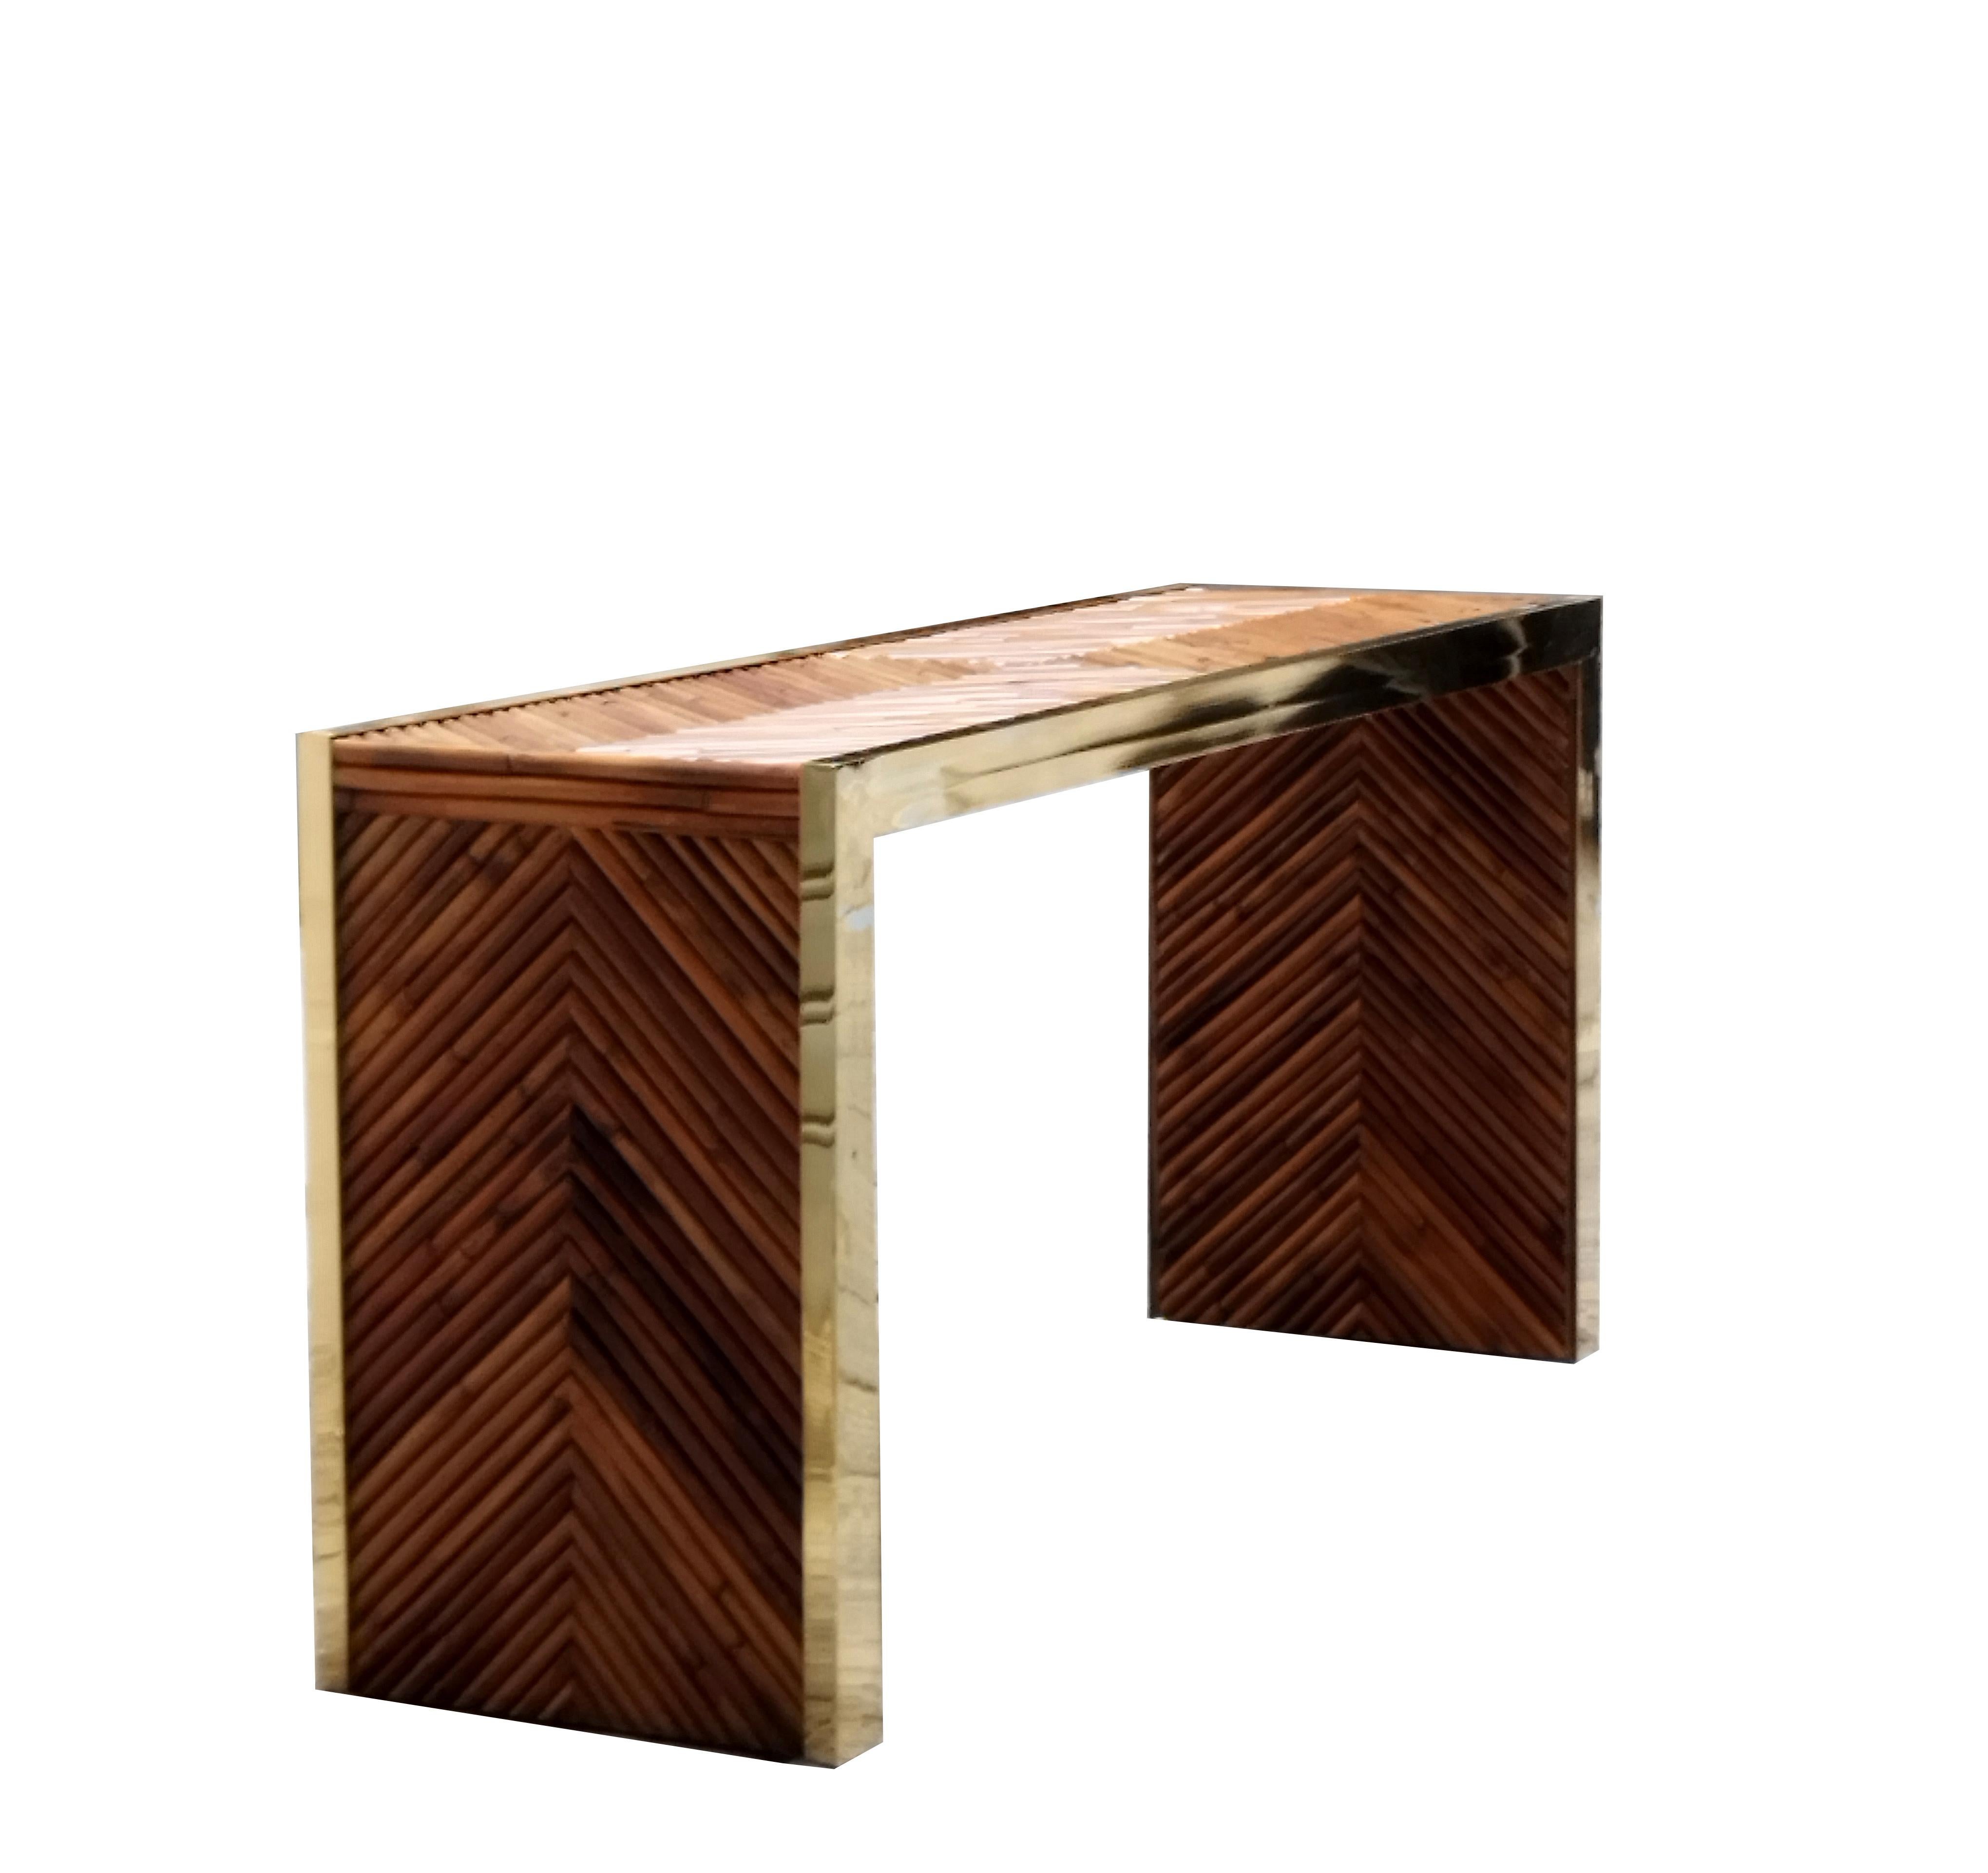 Modern console table with bamboo and brass top. It can be placed either as a centre piece or wall-mounted. Entirely handmade from rattan and brass, it is unique and beautiful. Artisanal work in the mood of Dal Vera, Vivai del Sud, Hollywood Regency.